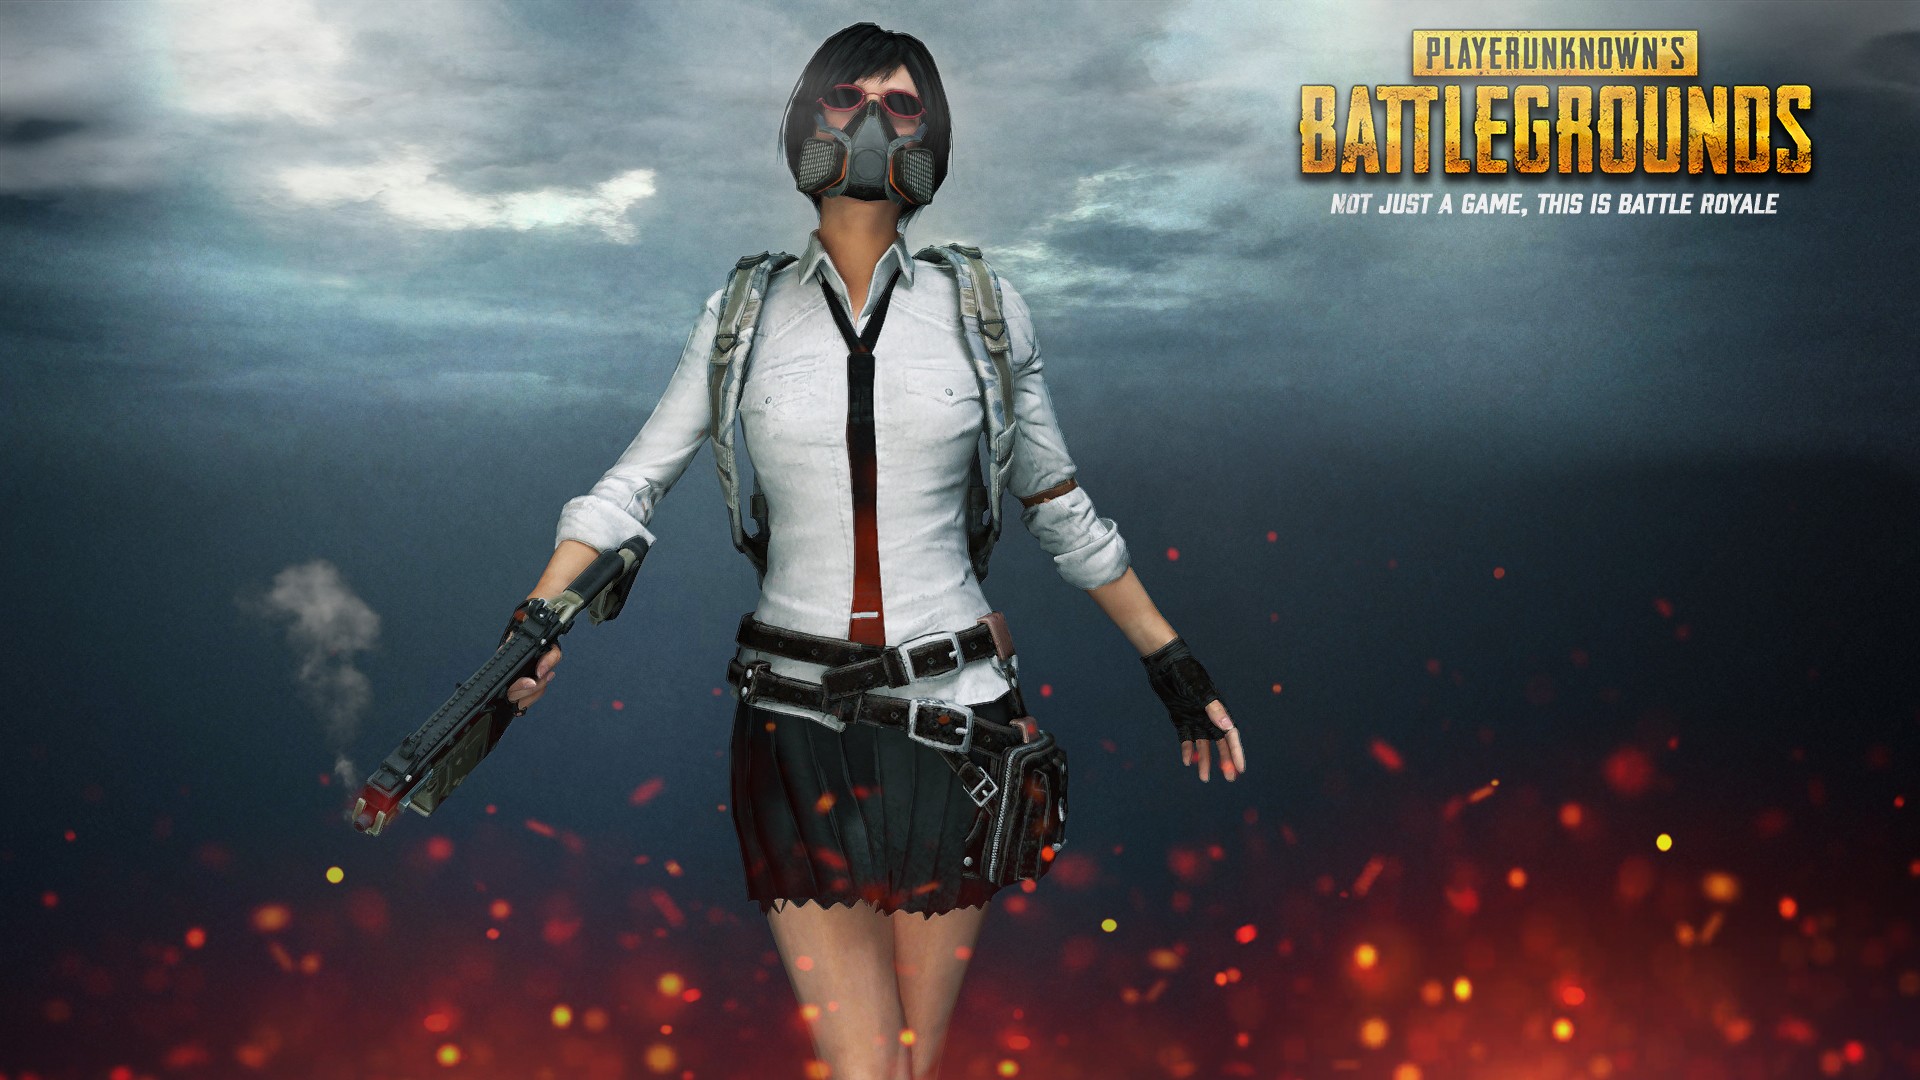 Wallpaper PUBG Xbox Desktop with image resolution 1920x1080 pixel. You can use this wallpaper as background for your desktop Computer Screensavers, Android or iPhone smartphones